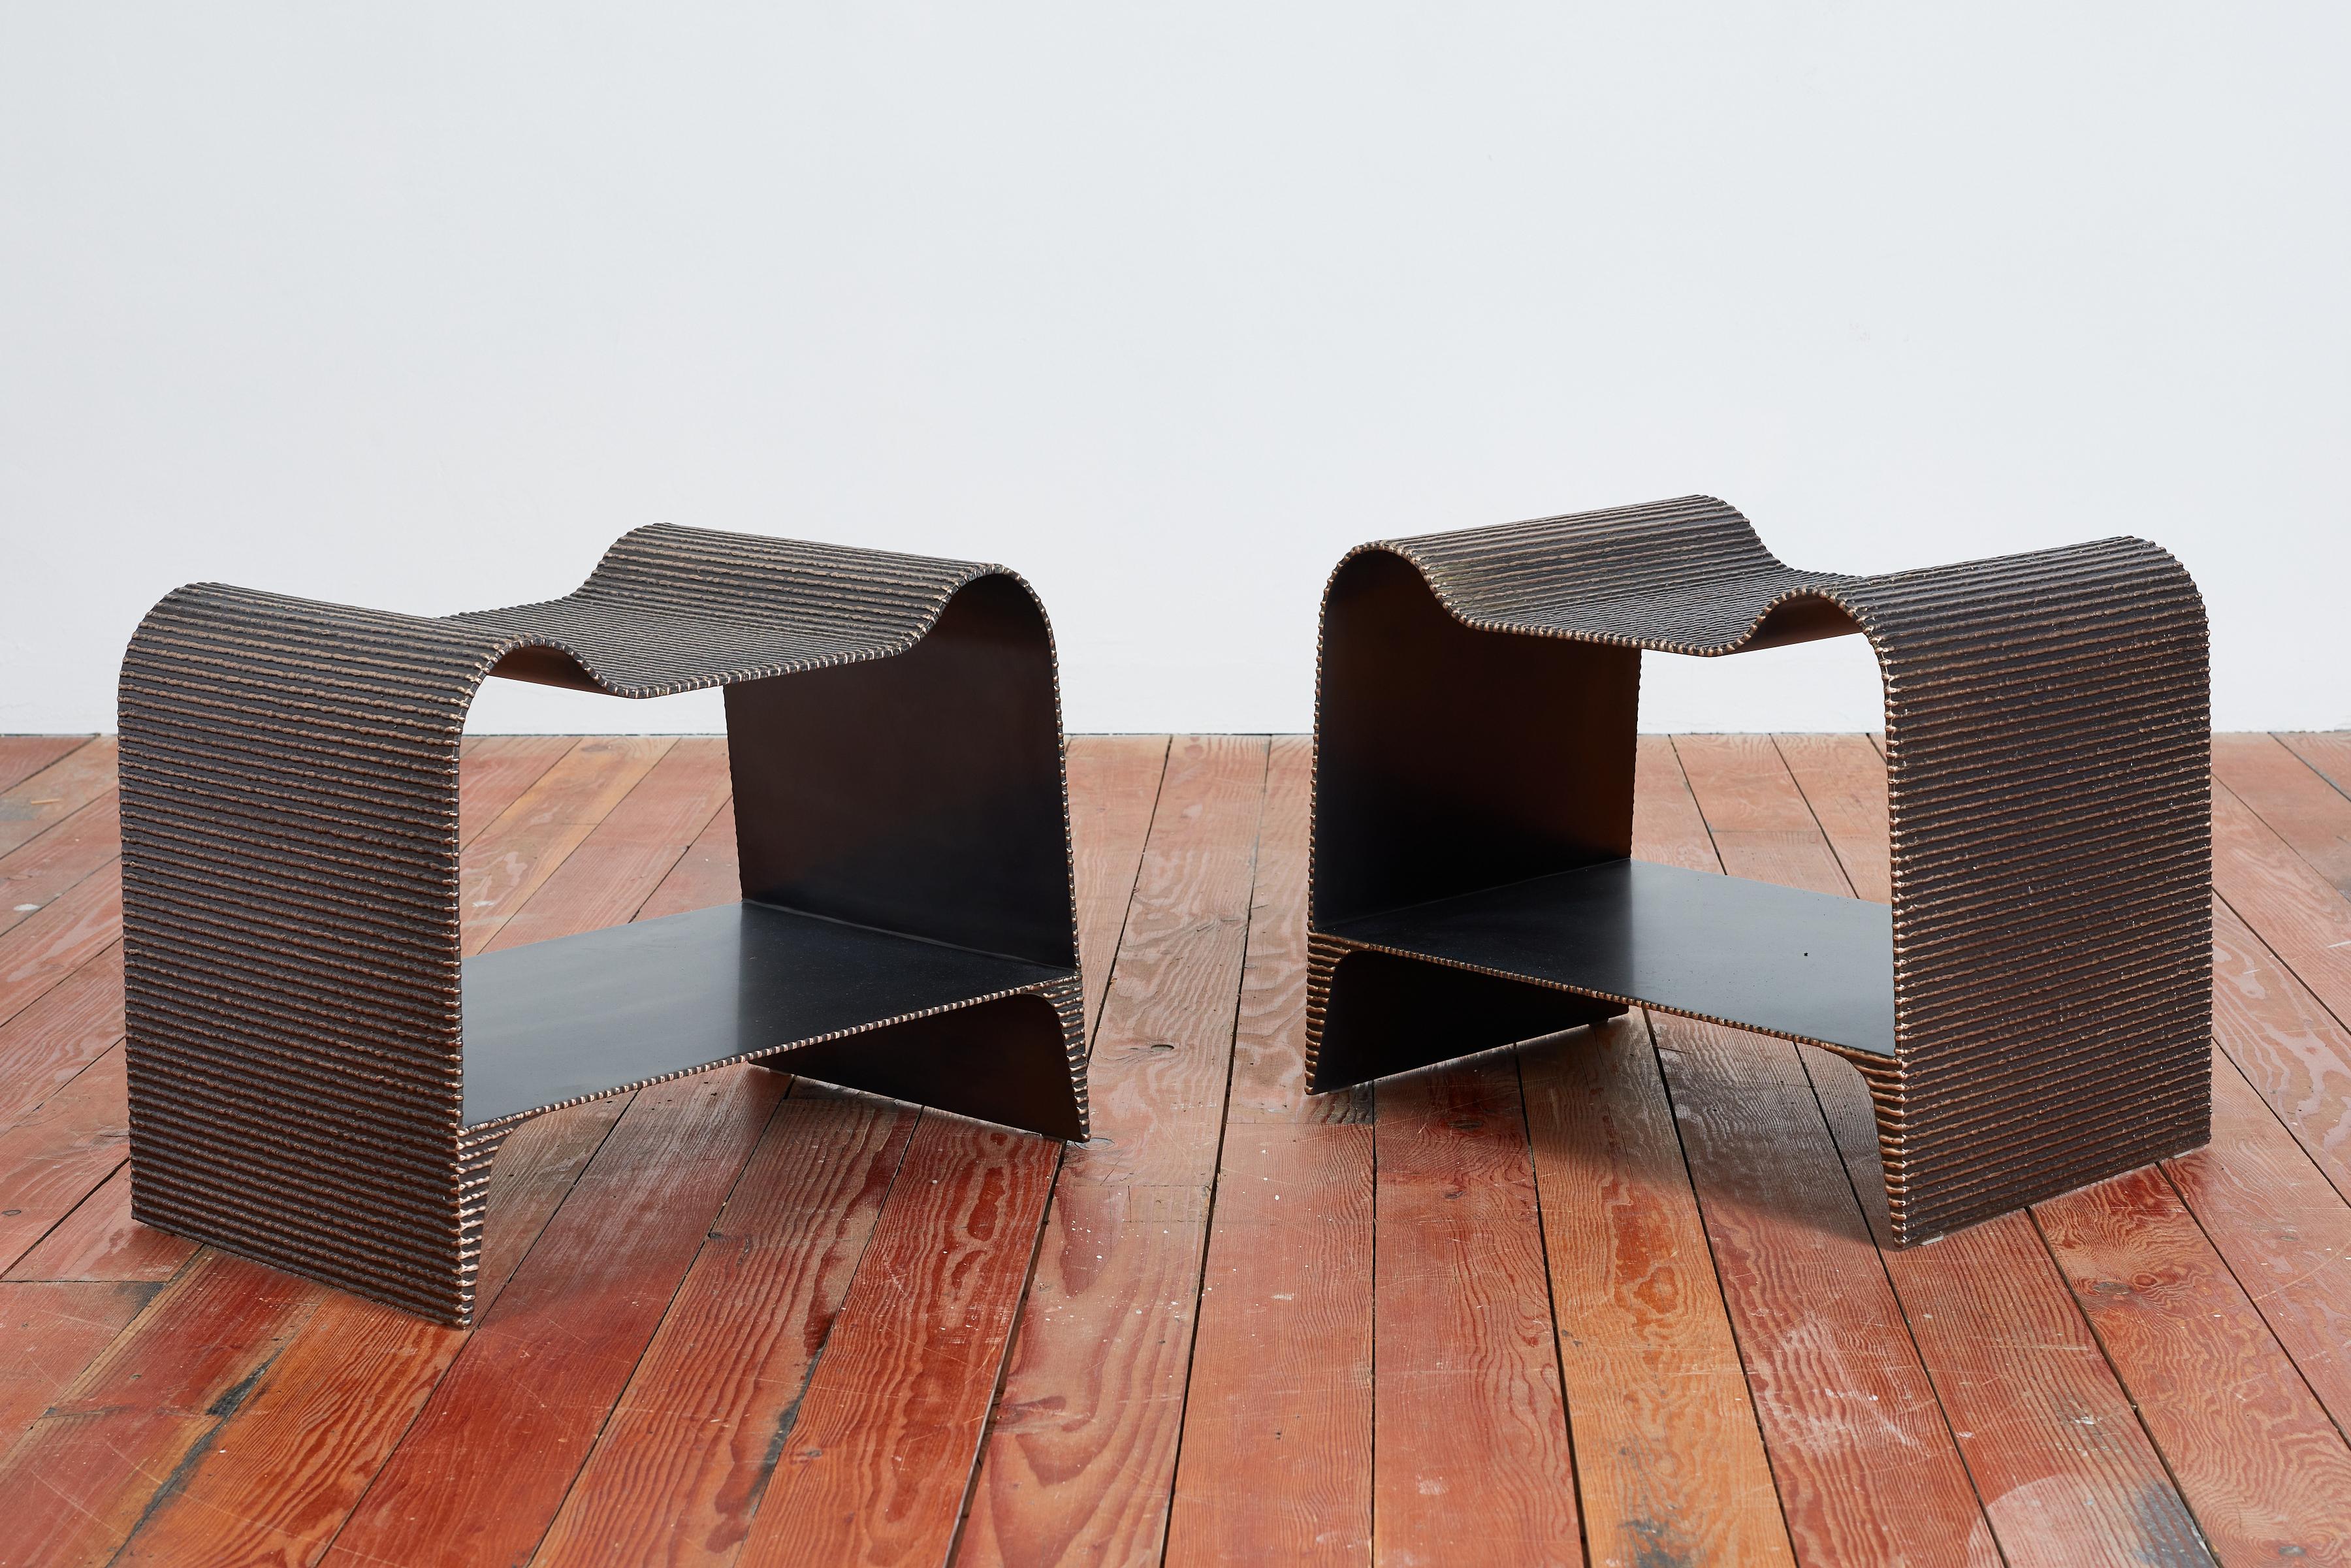 Set Of 2 Molten End Tables by William Emmerson
Dimensions: D 40,7 x W 59, 7x H 48,3 cm.
Materials: Bronze and steel.
 
William Emmerson's brilliantly designed 